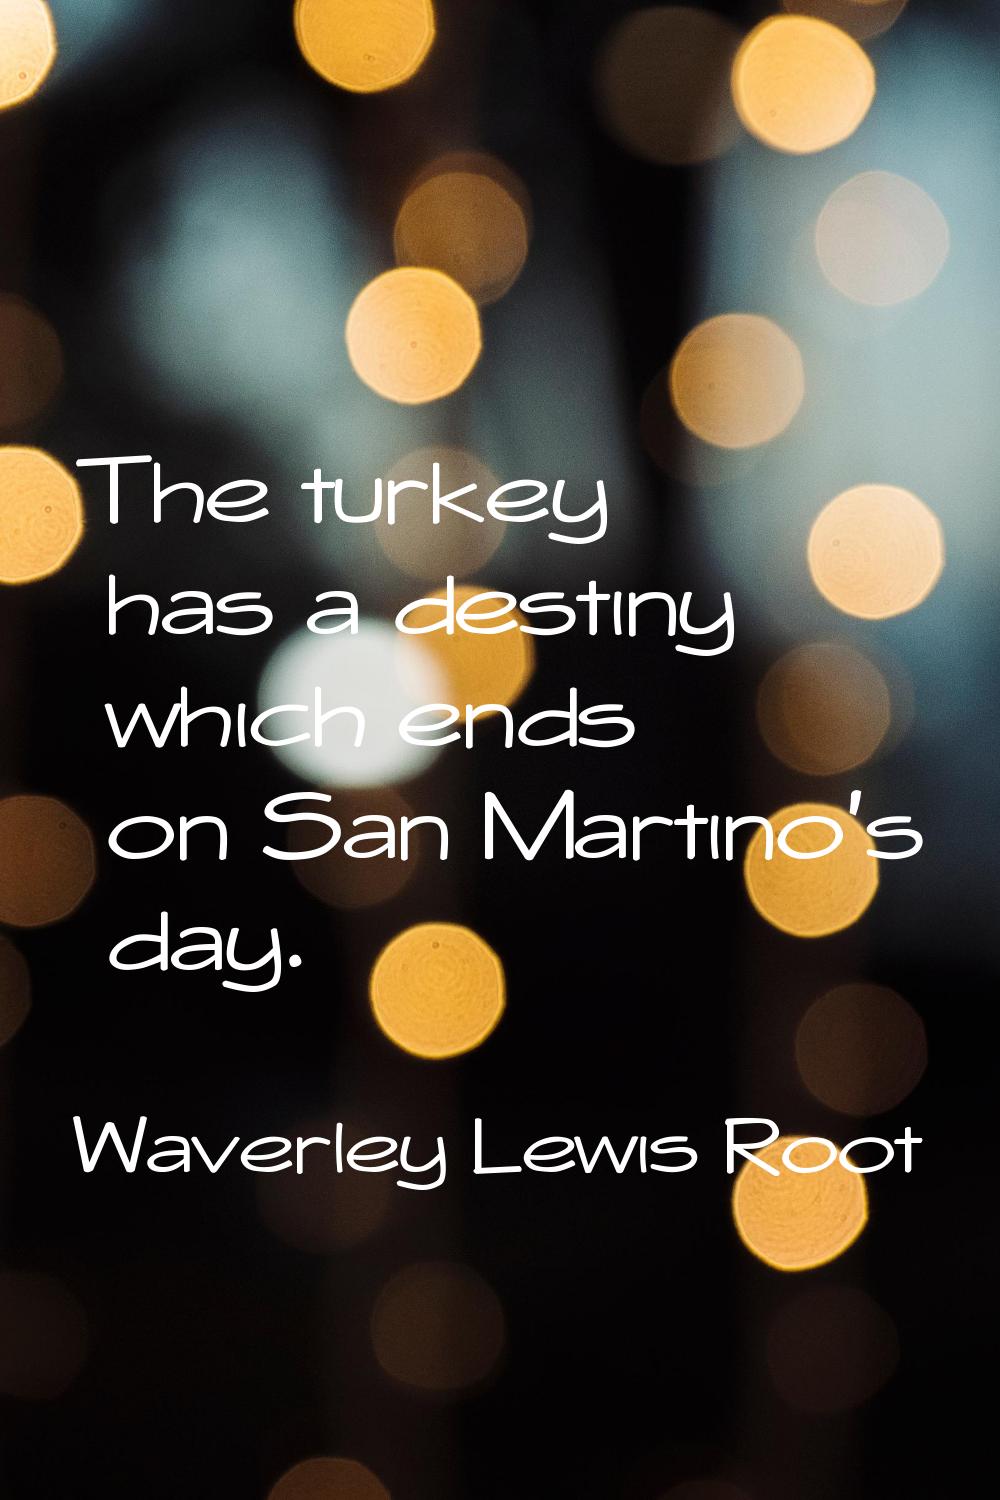 The turkey has a destiny which ends on San Martino's day.